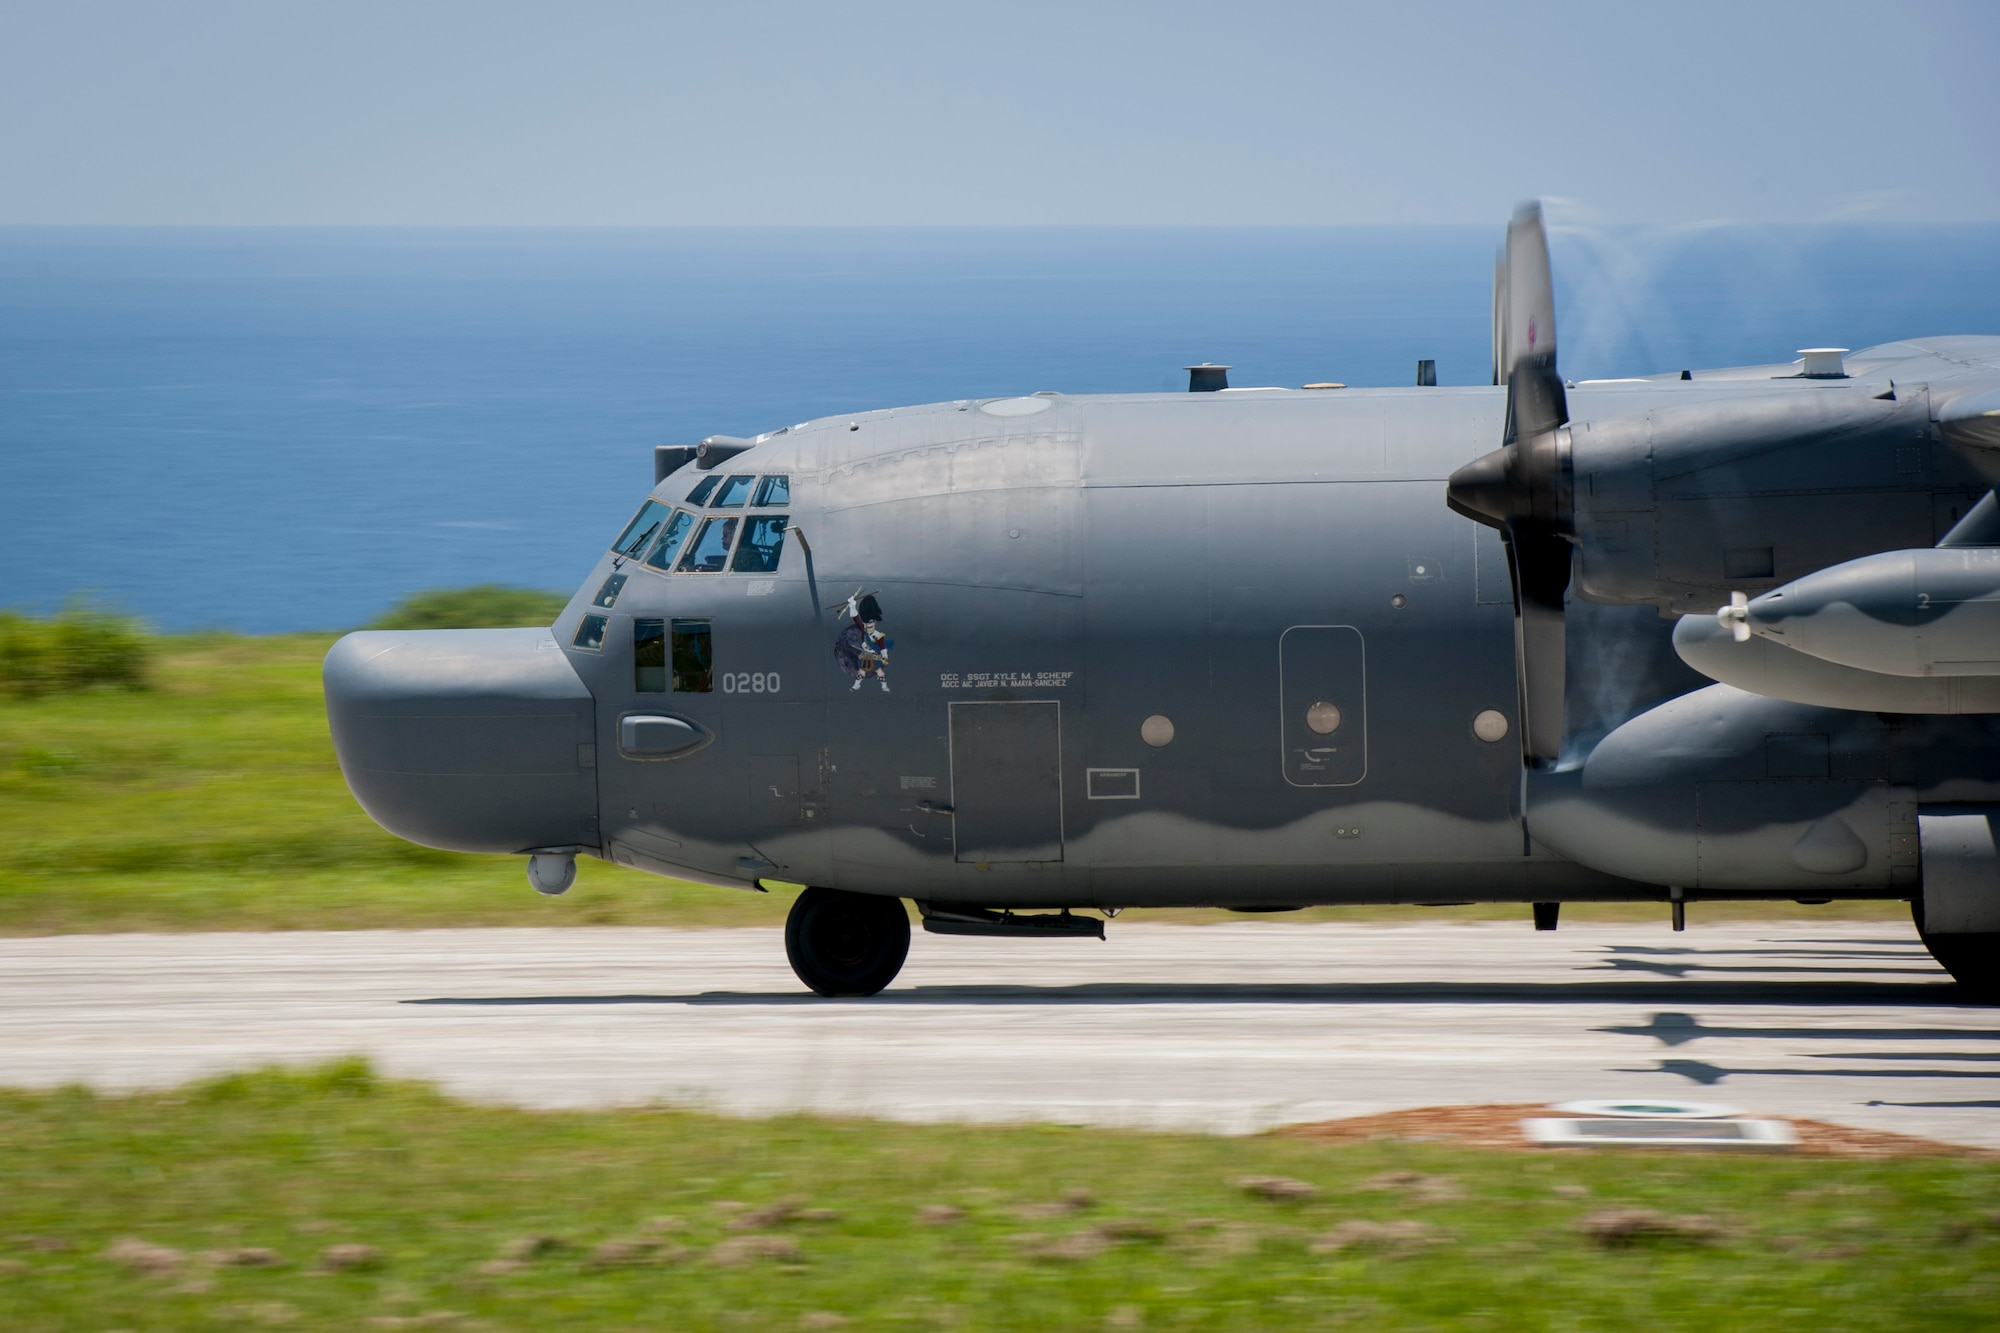 A U.S. Air Force MC-130H Combat Talon II assigned to the 17th Special Operations Squadron, Kadena Air Base, takes off during a long-range airfield seizure exercise July 20, 2016, at Iejima airfield, Japan. The 17th SOS aircrews conducted the exercise with U.S. Marine Corps Golf and Fox Companies, 2nd Battalion, 2nd Marine Regiment assigned to Camp Lejeune, N.C., and the Marine Medium Tiltrotor Squadron 265 assigned to Marine Corps Air Station Futenma. (U.S. Air Force Photo by Senior Airman Peter Reft) 